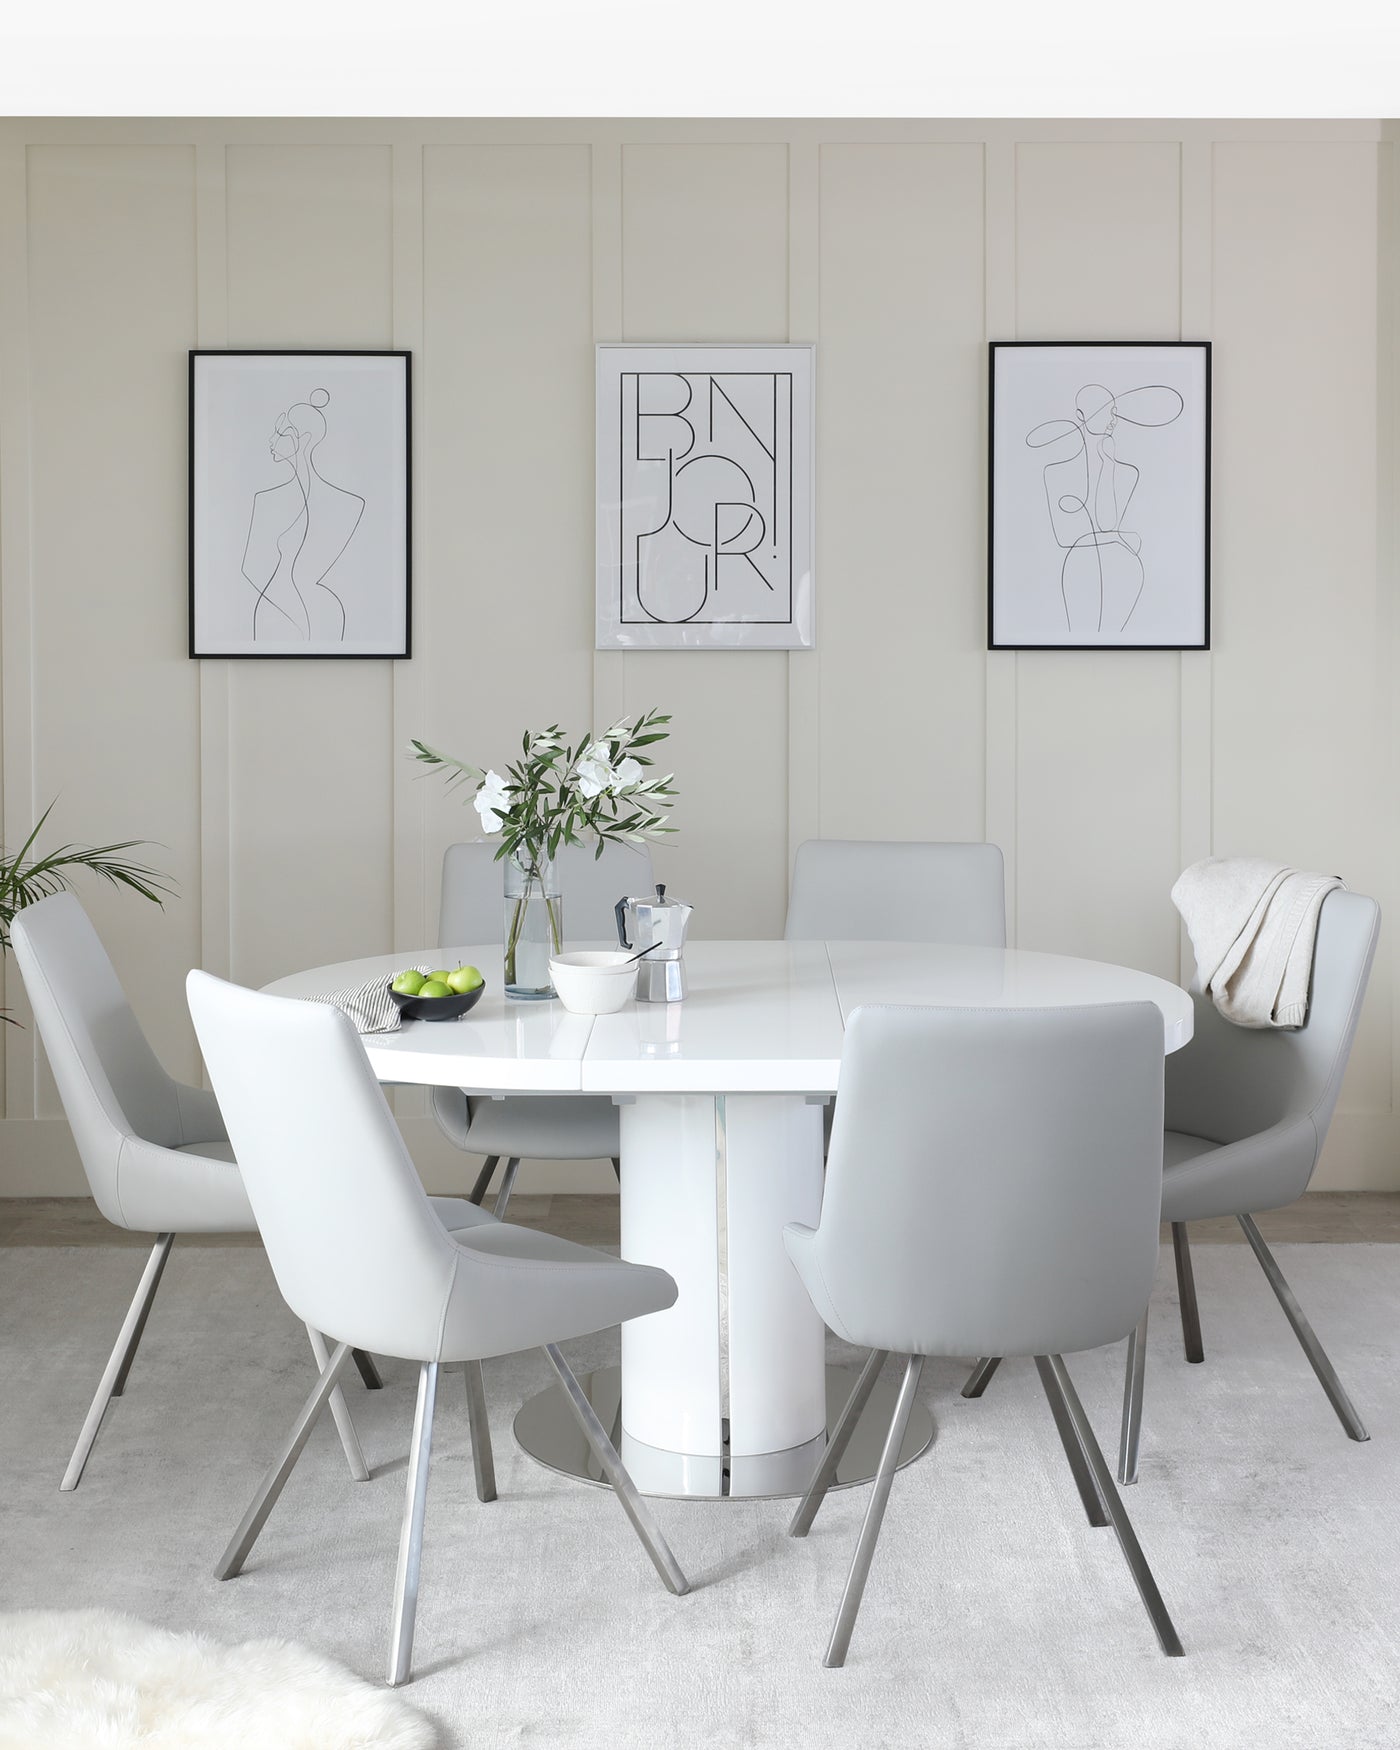 Modern dining room furniture set featuring a round, white table with a glossy finish and central pedestal base, paired with sleek grey upholstered chairs with metallic legs.